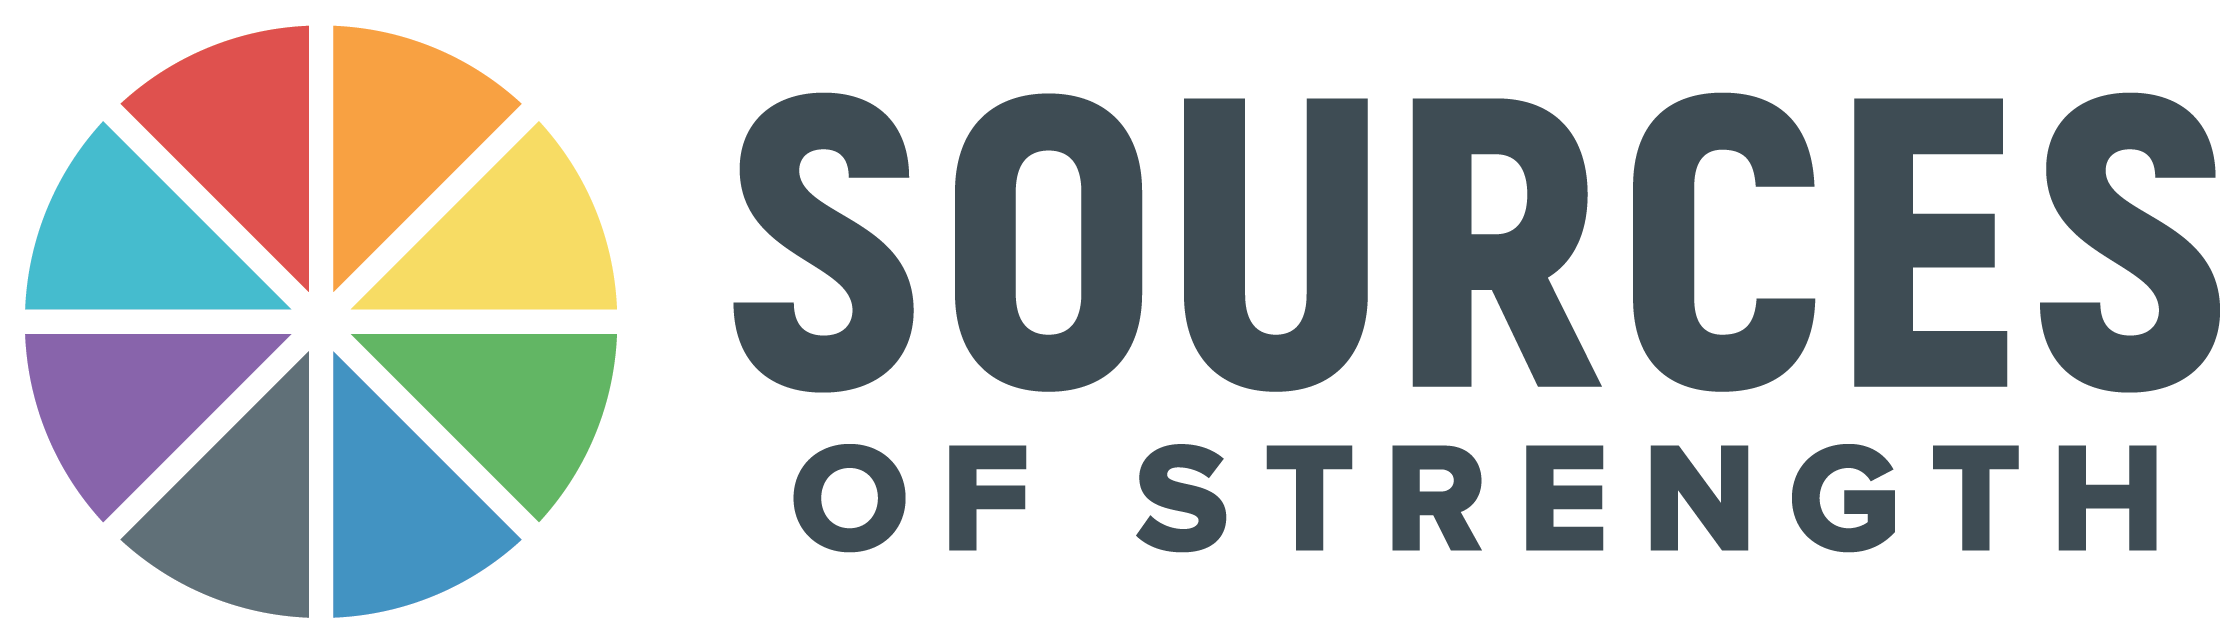 sources of strength logo flat